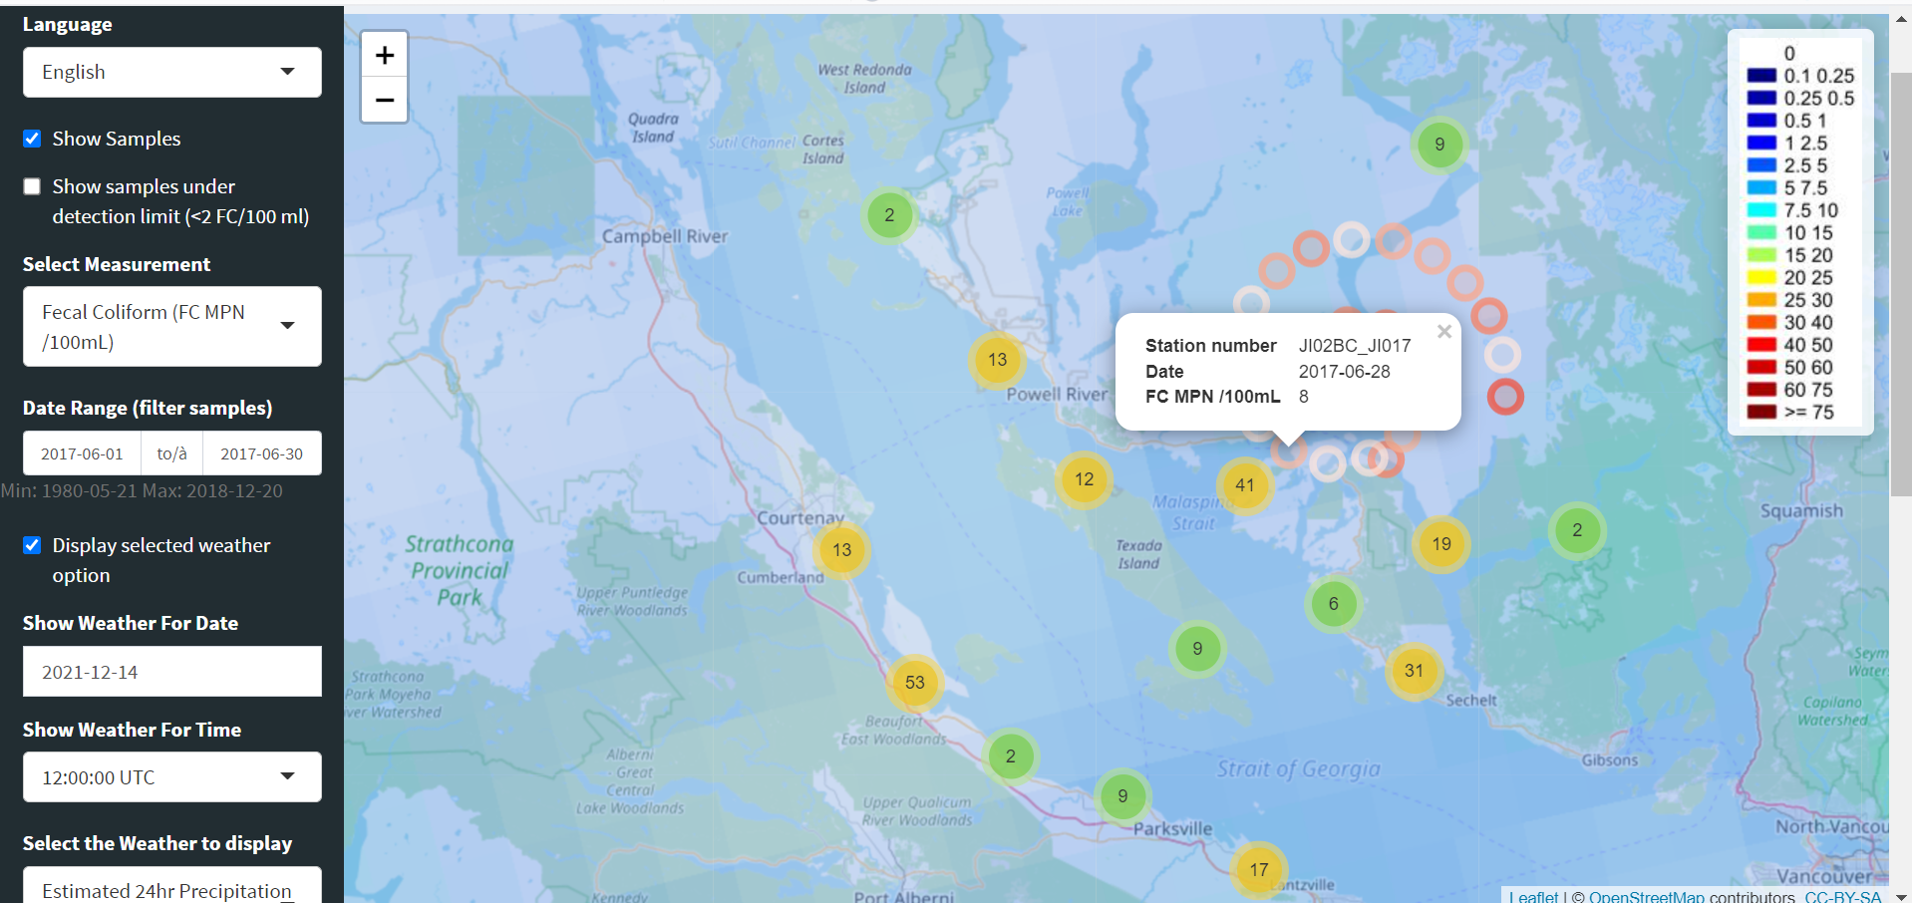 Demonstration of shellfish water classification interactive map tool.